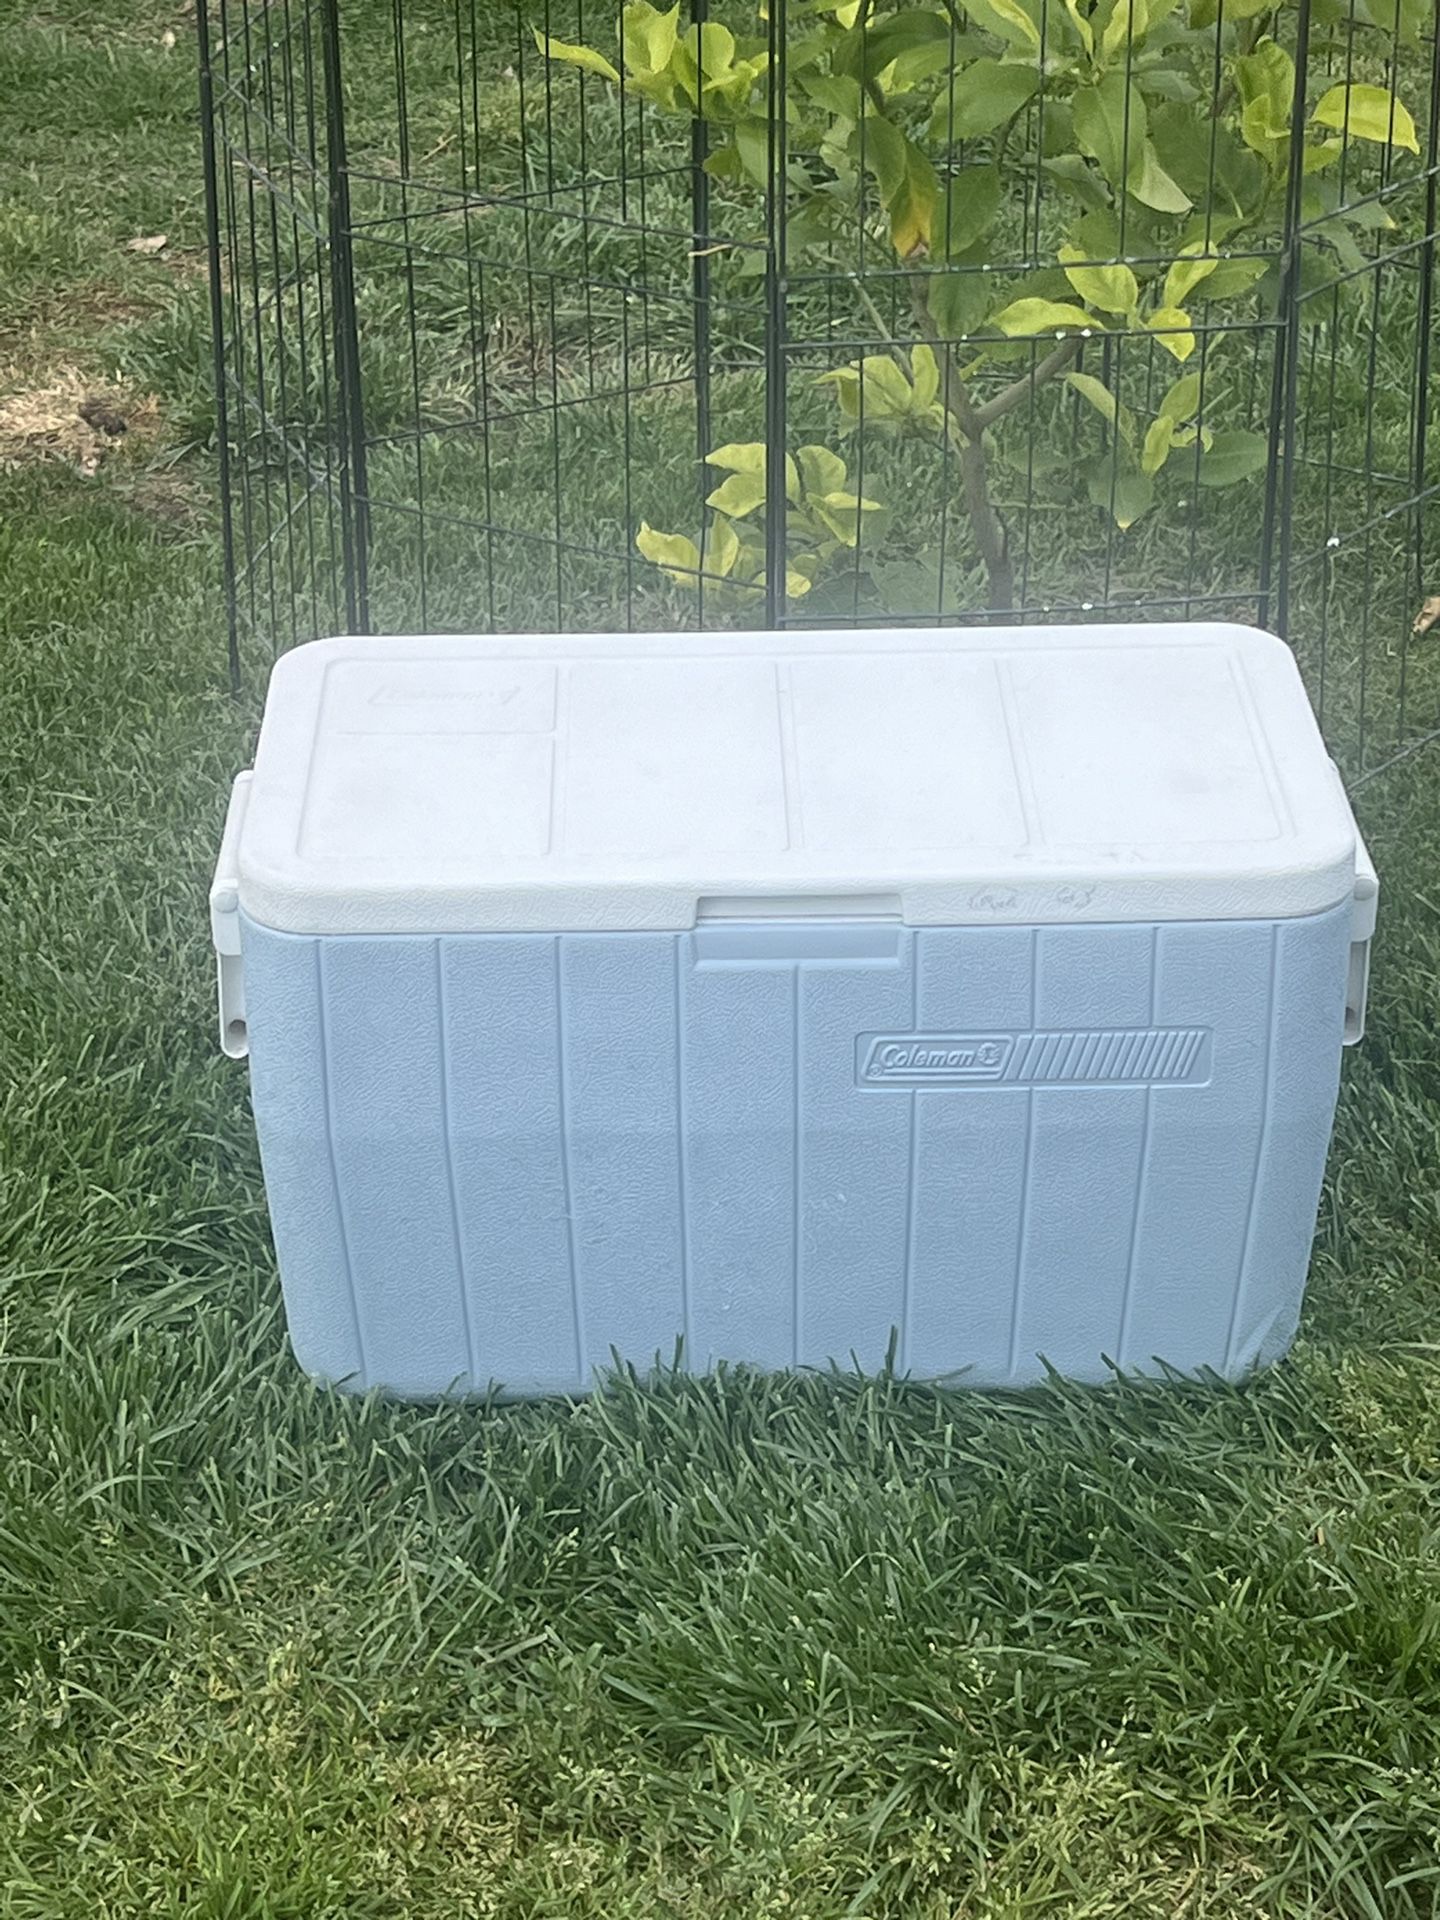 COLEMAN,ICE CHEST,COOLER